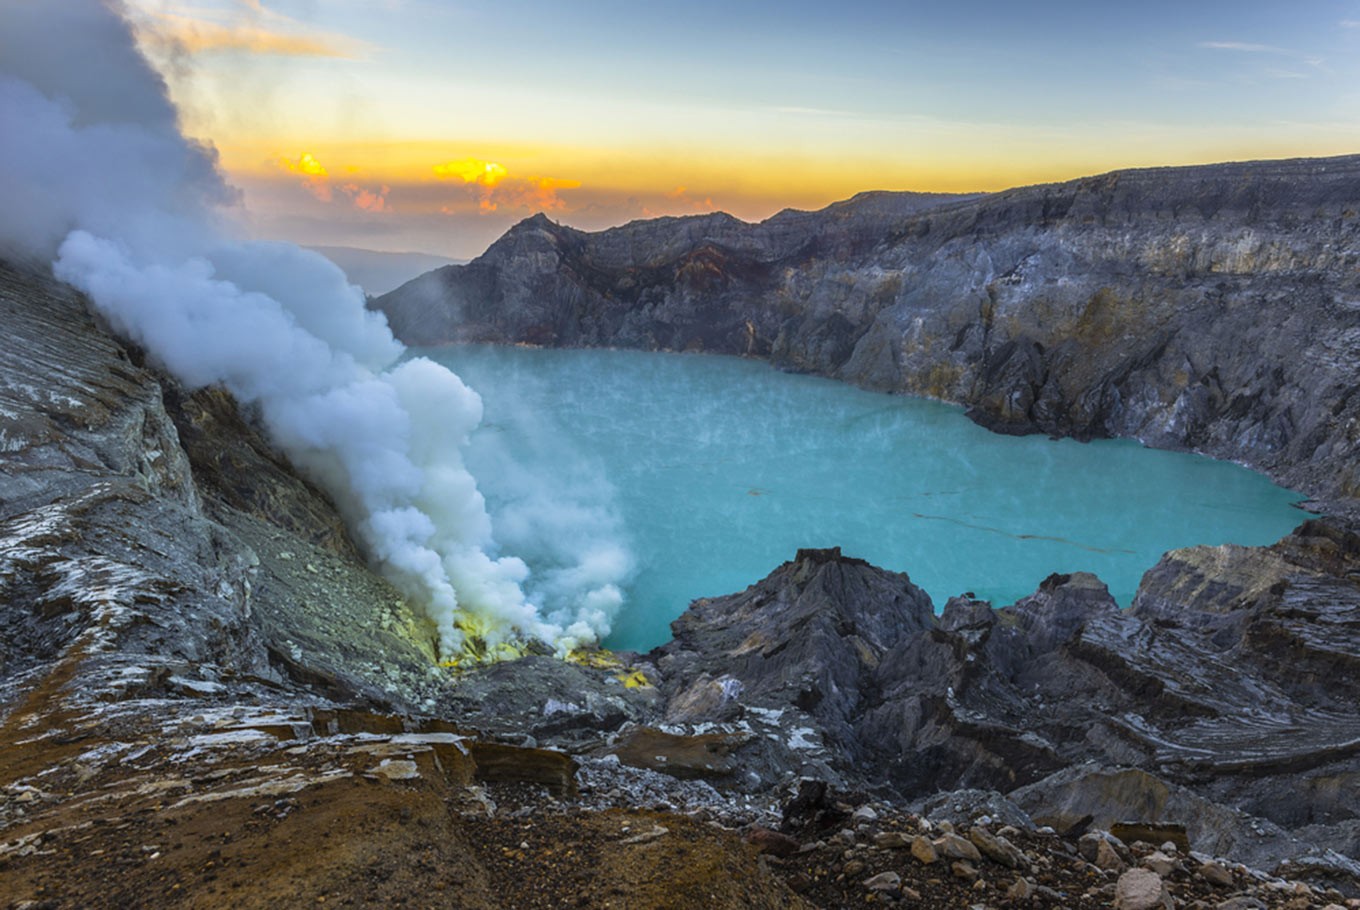  Ijen  Crater tourist site closed due to toxic gases News 